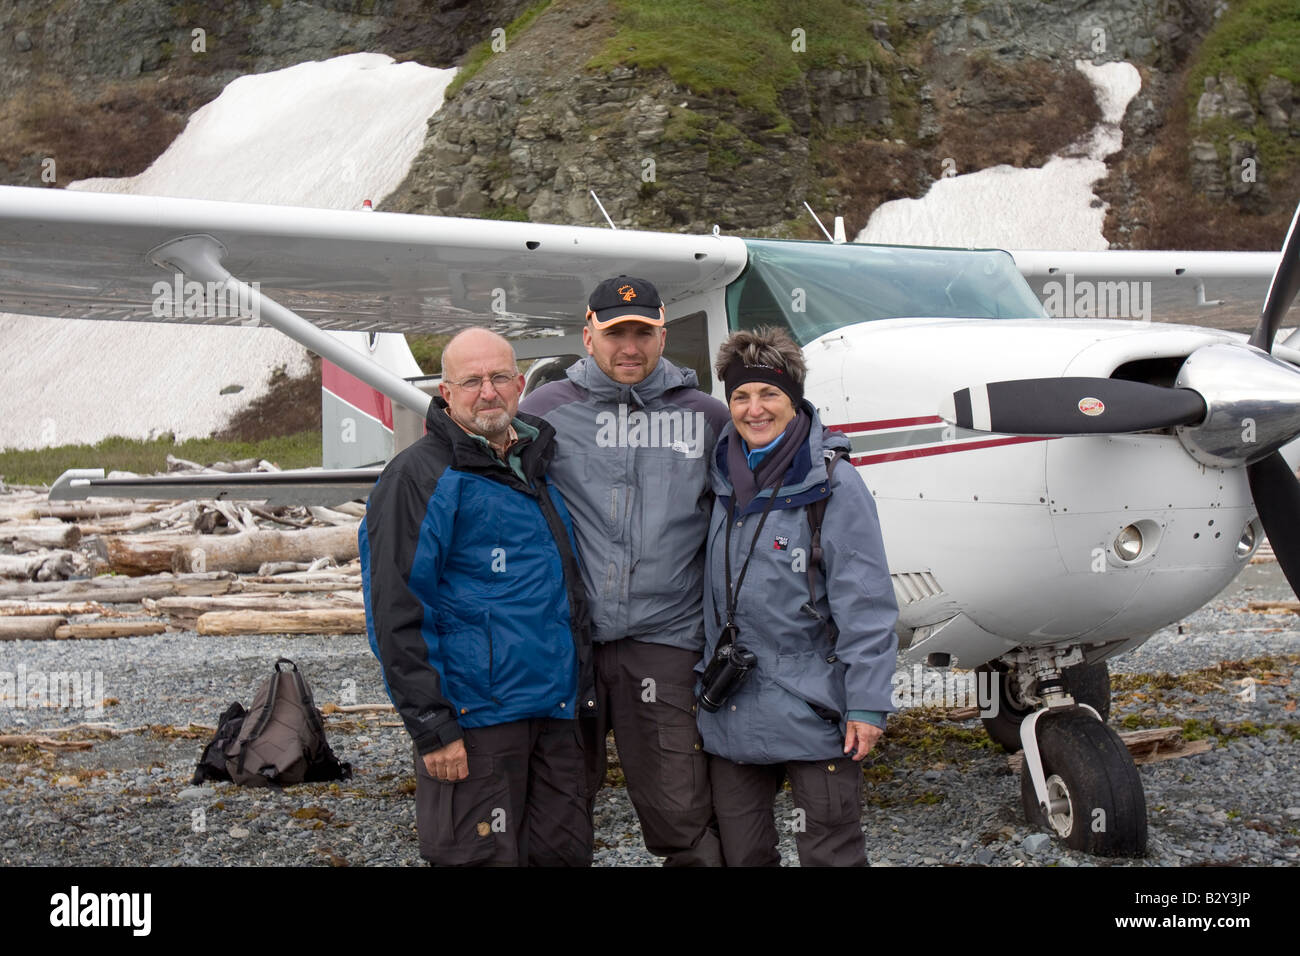 Tourists in front of the small airplane that flew them out to this beach to watch bears in Katmai National Park & Preserve. Stock Photo